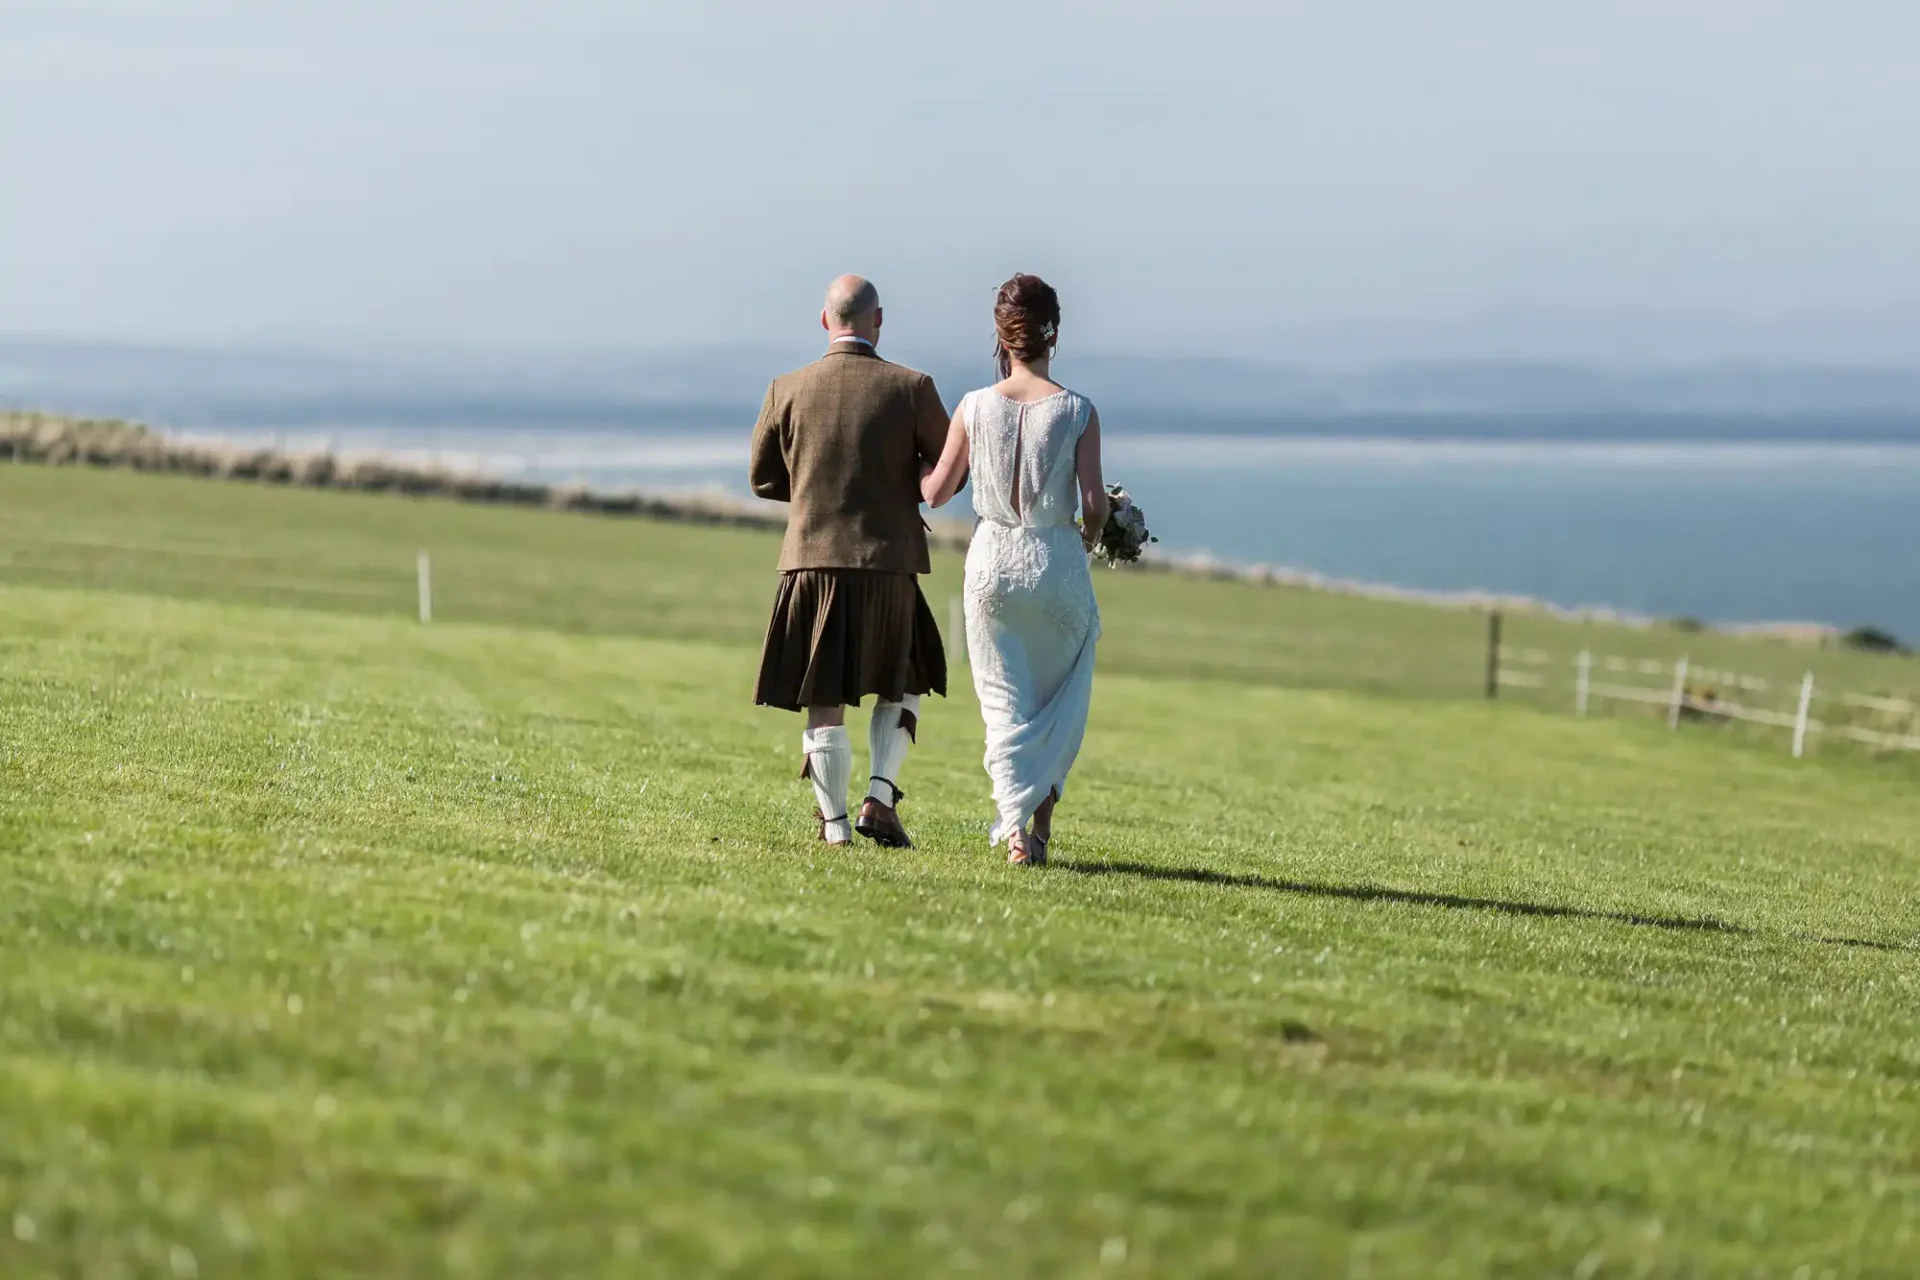 A bride and groom in traditional attire walking on a grassy field by the sea. the groom wears a kilt, and the bride carries a bouquet.